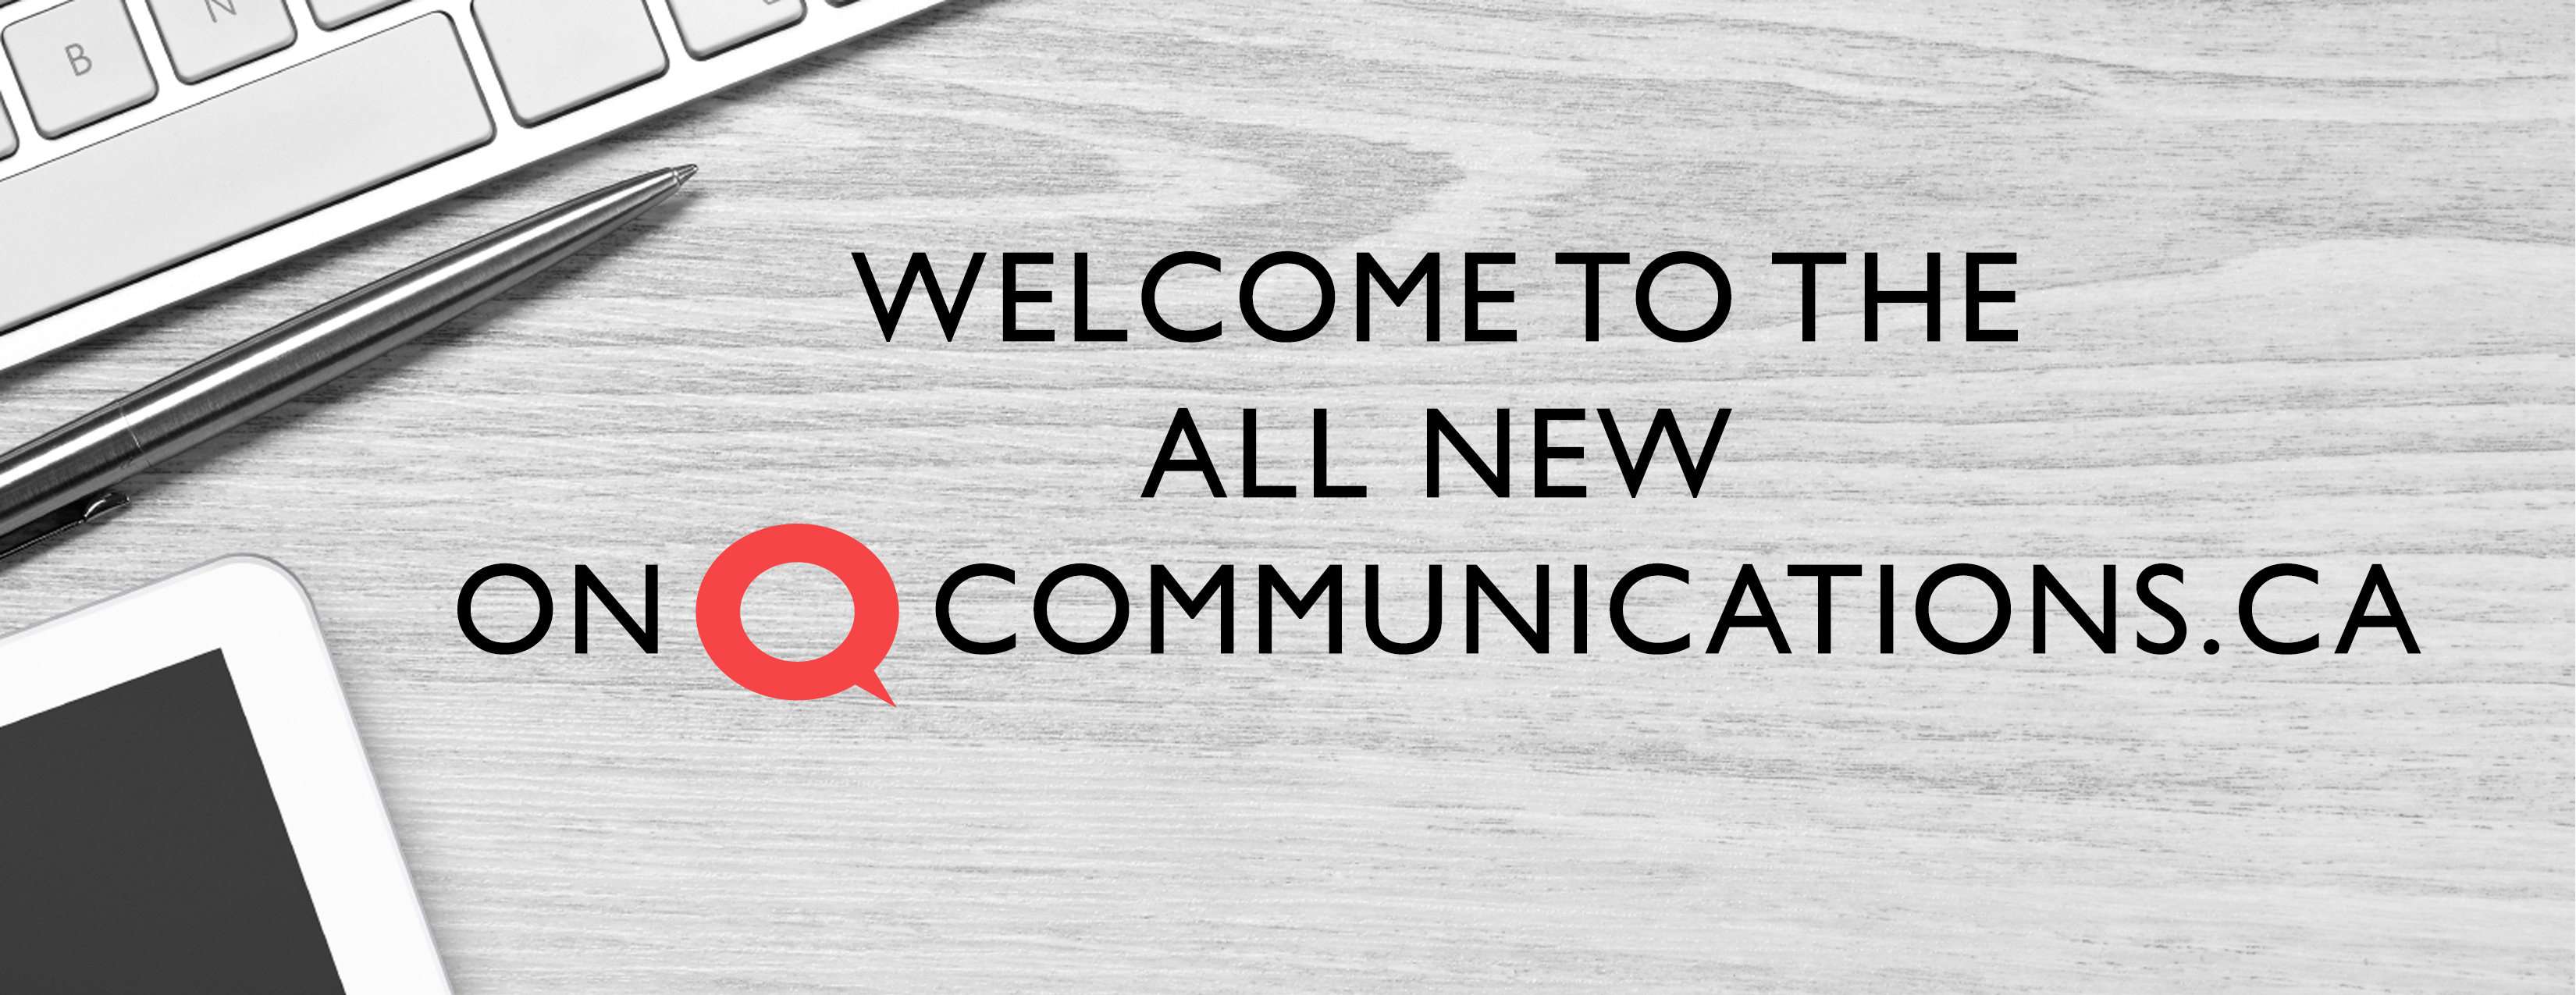 Welcome to the all new On Q Communications.ca!